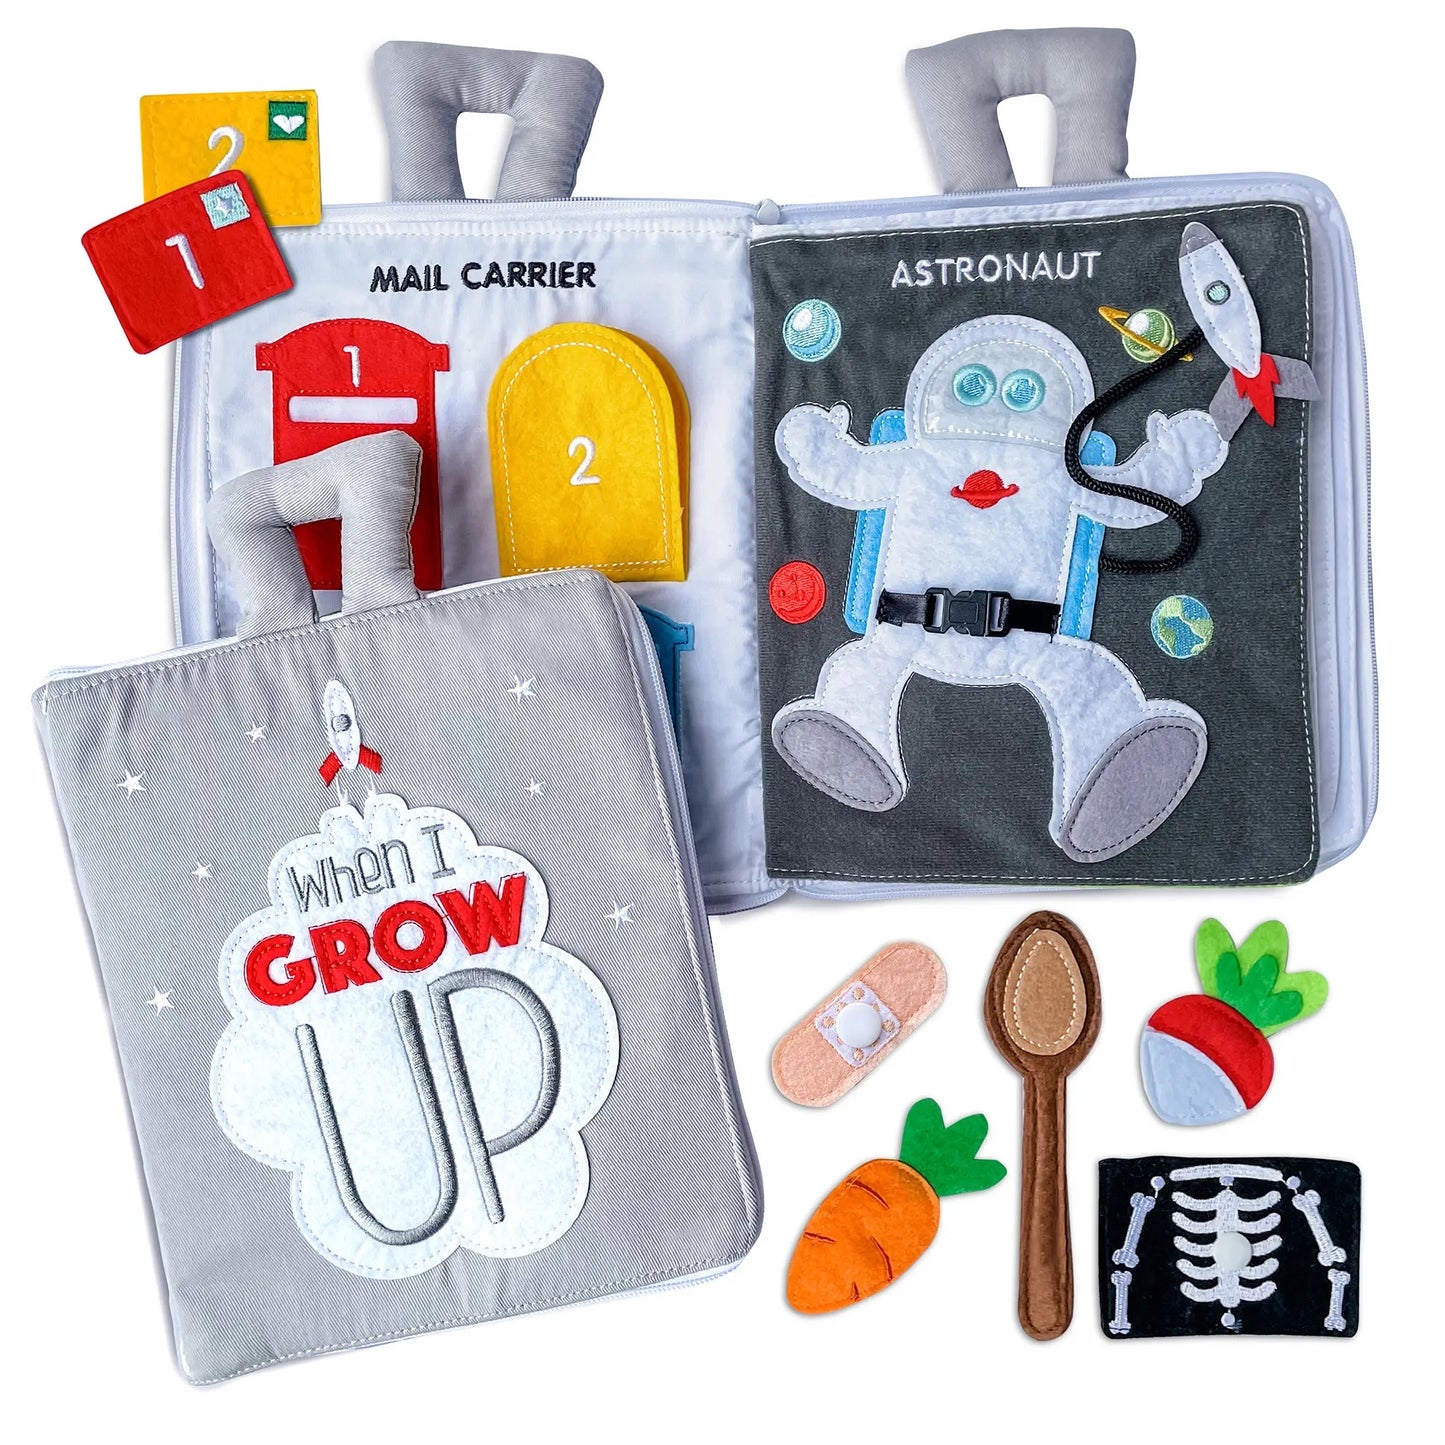 Fabric Activity Book | When I Grow Up